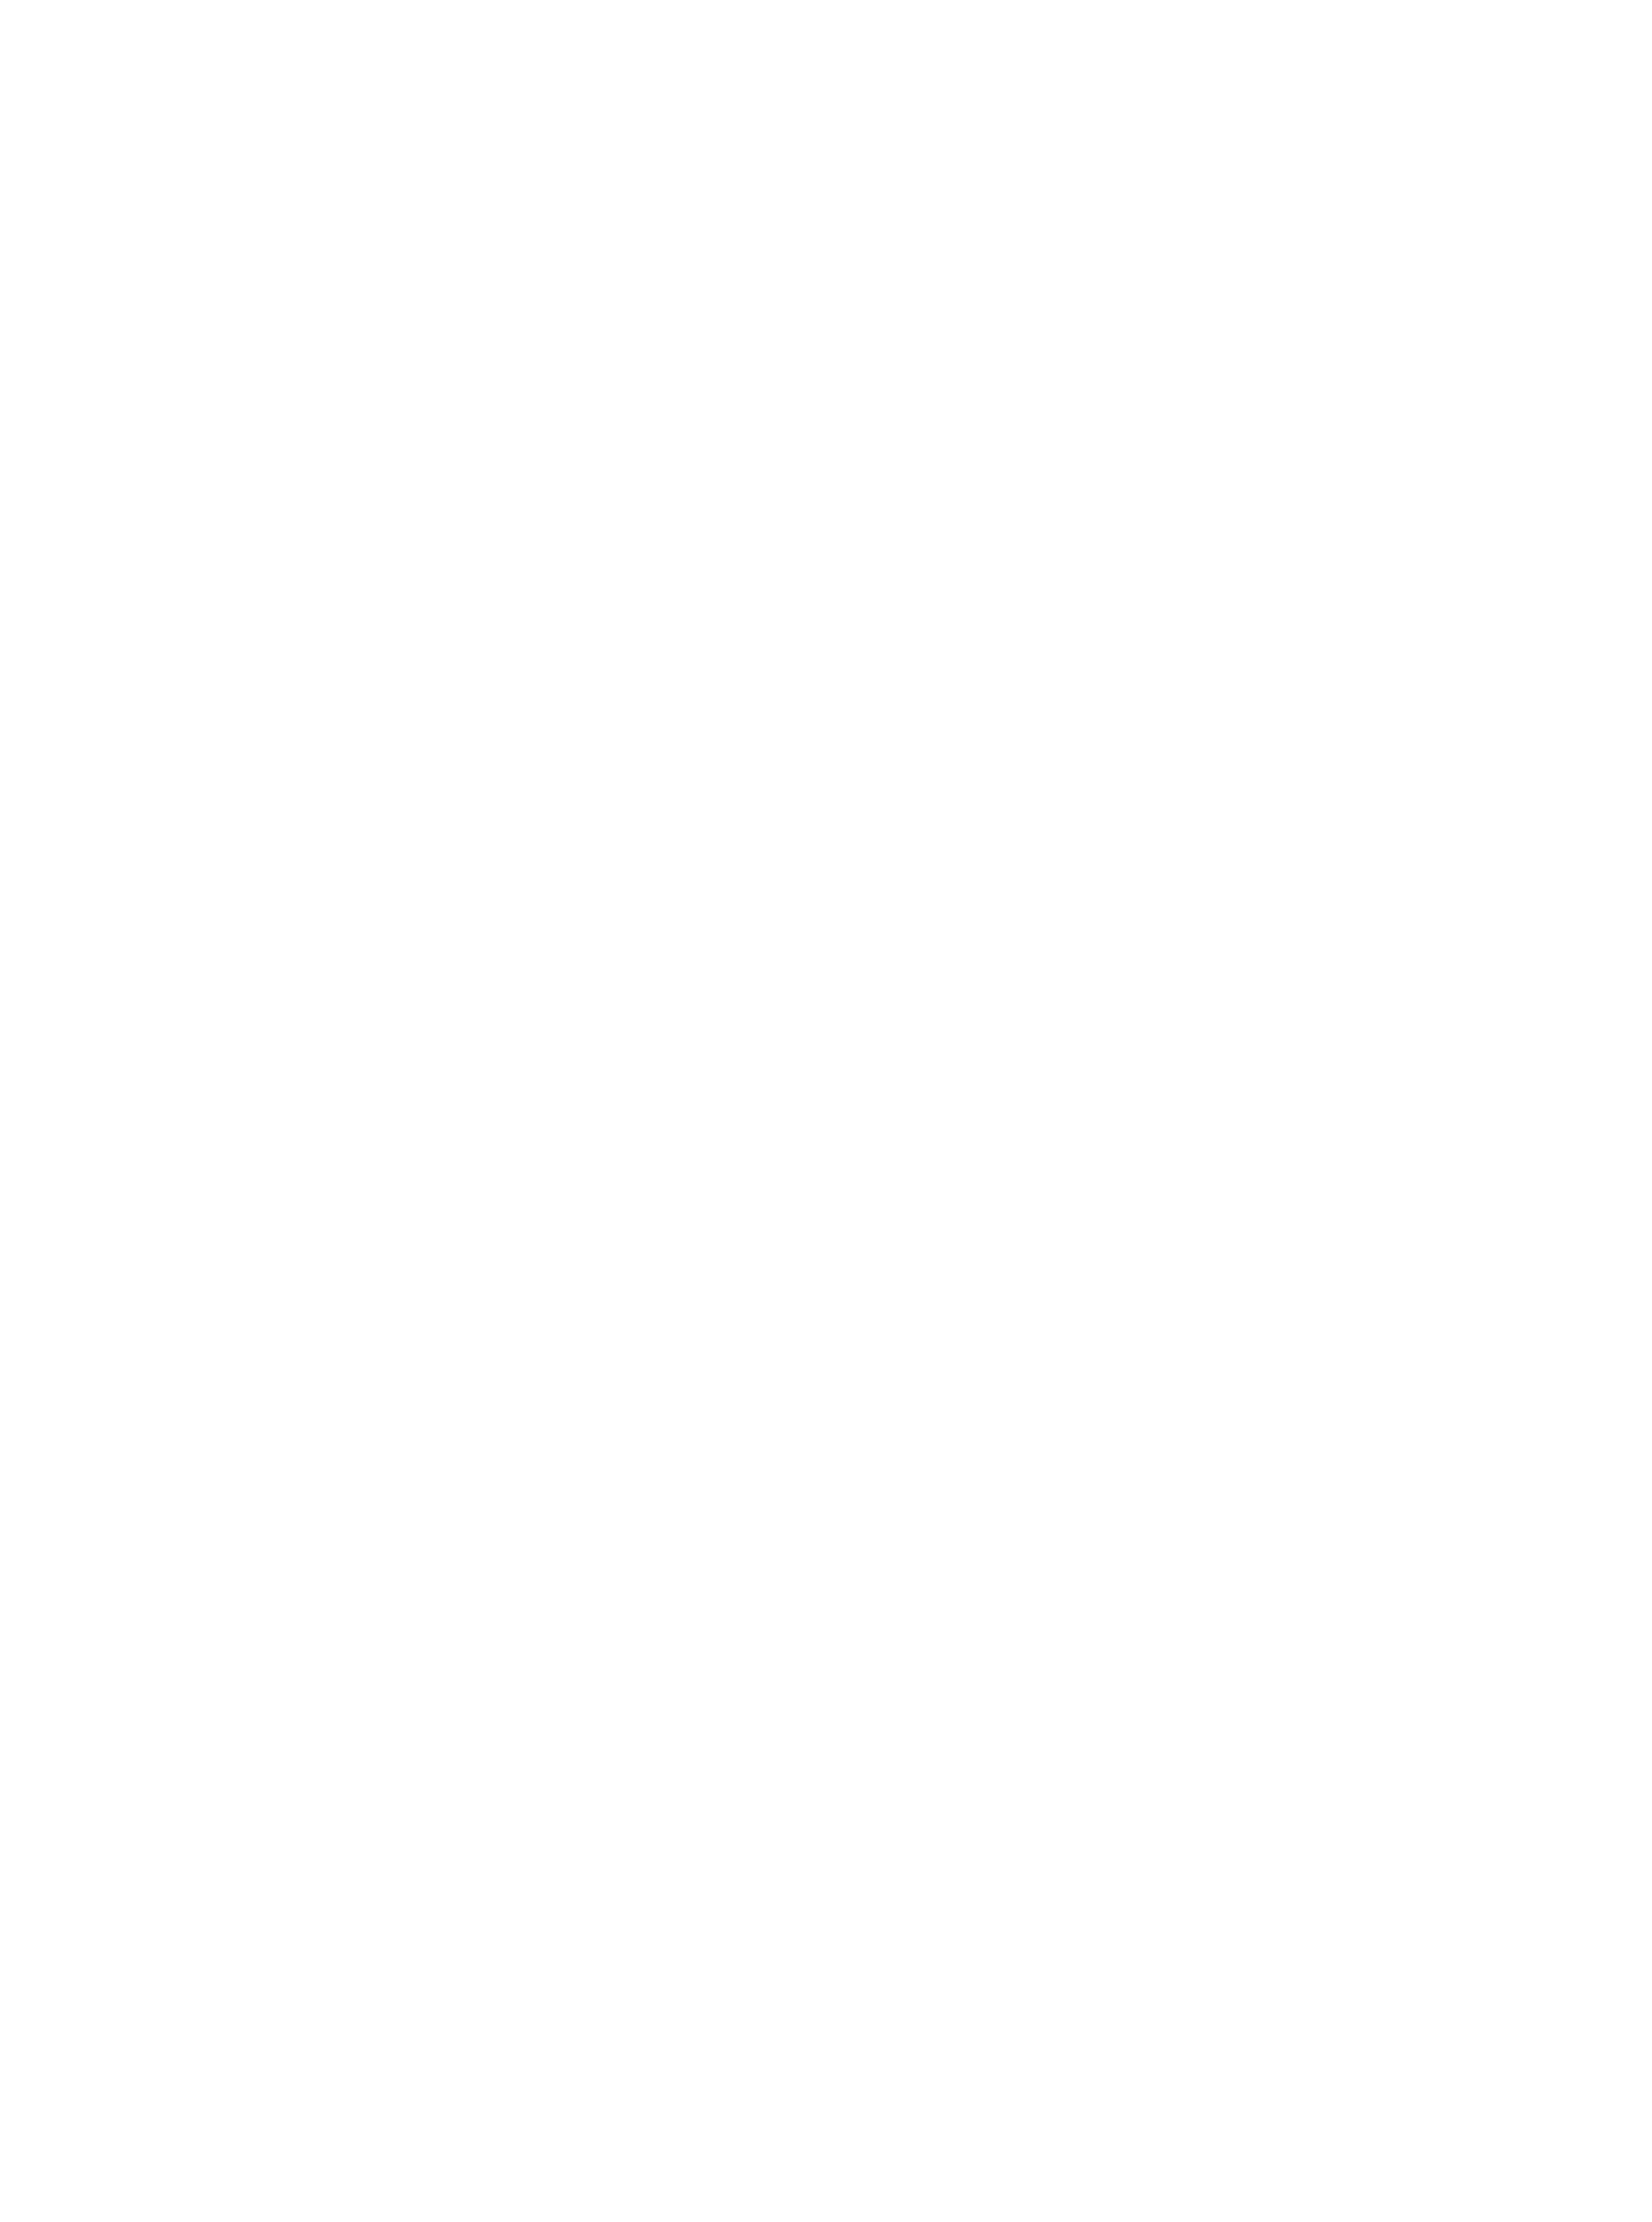 house outline - real estate